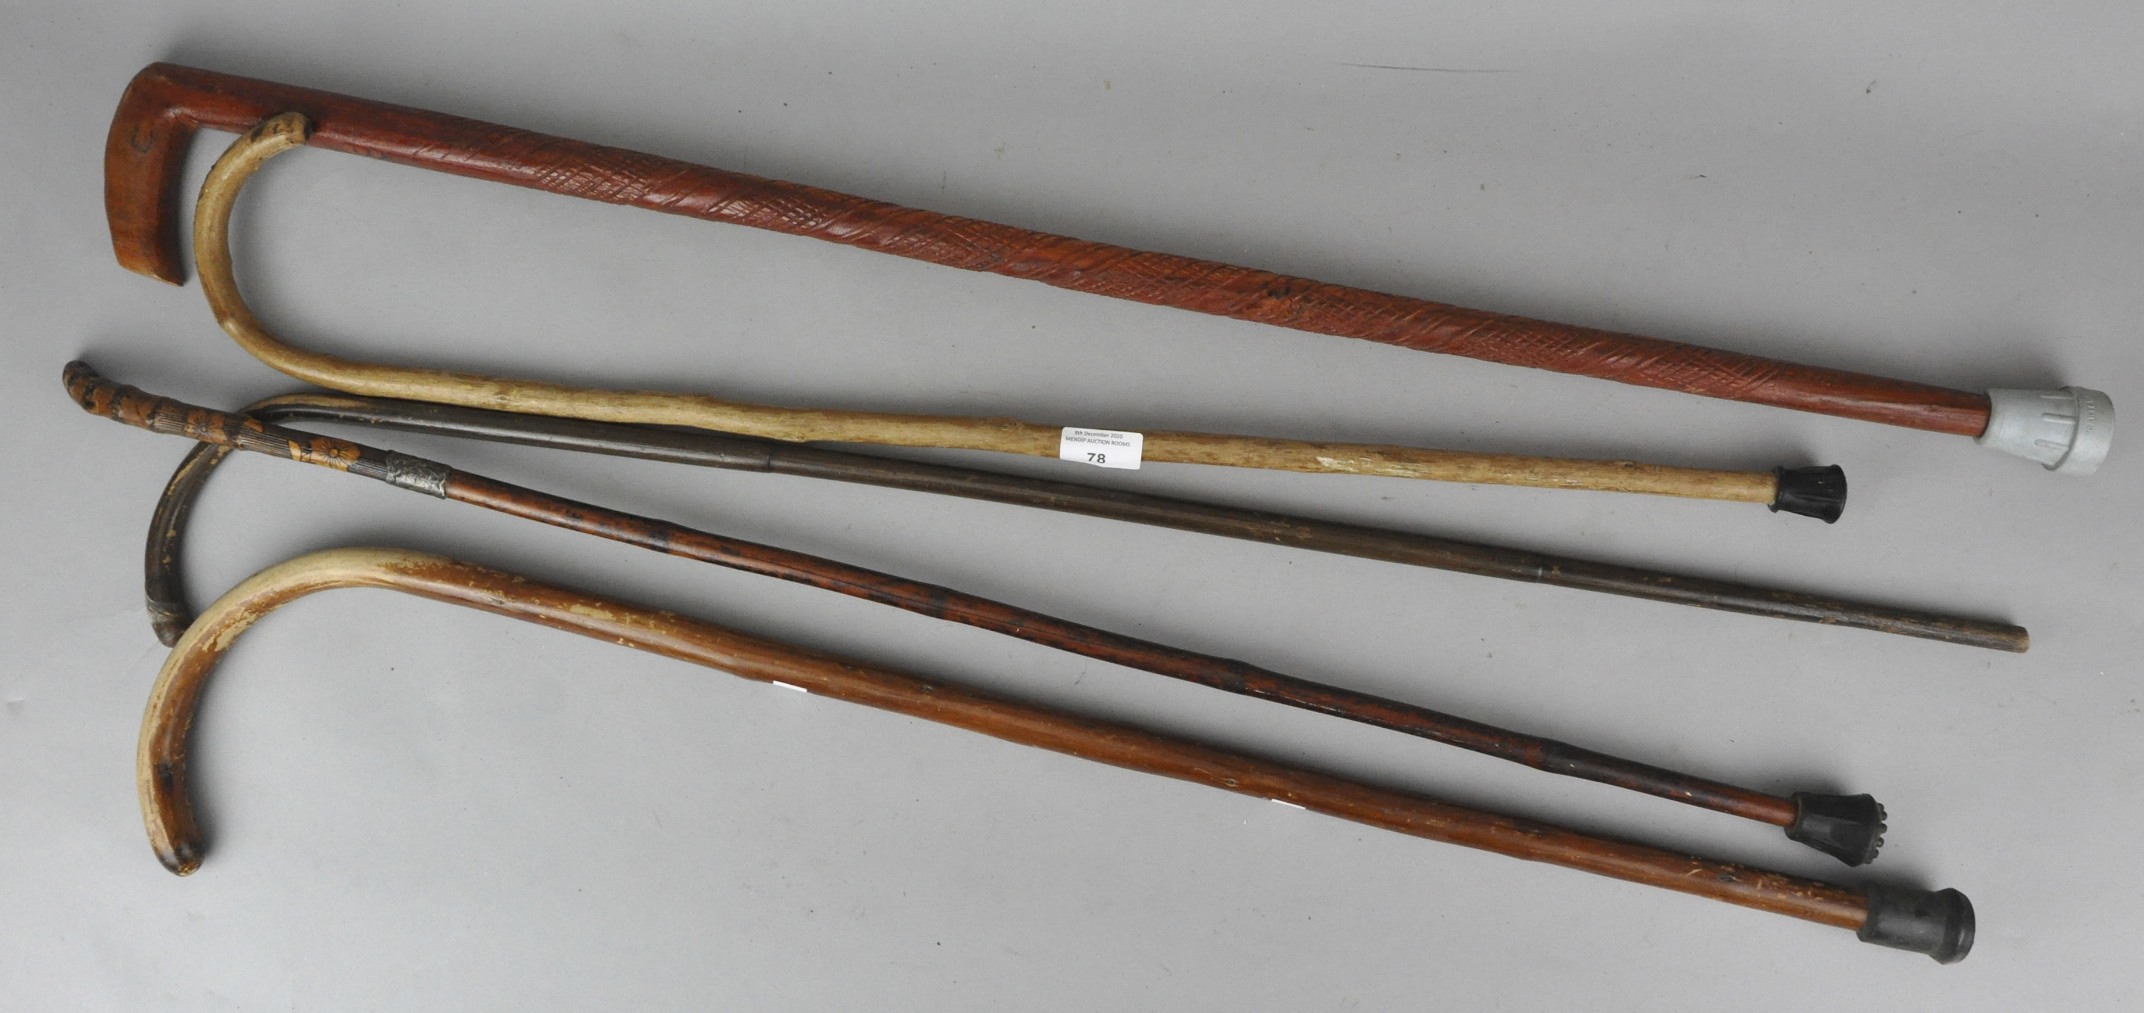 A collection of five wooden walking sticks and canes to include a silver mounted example.